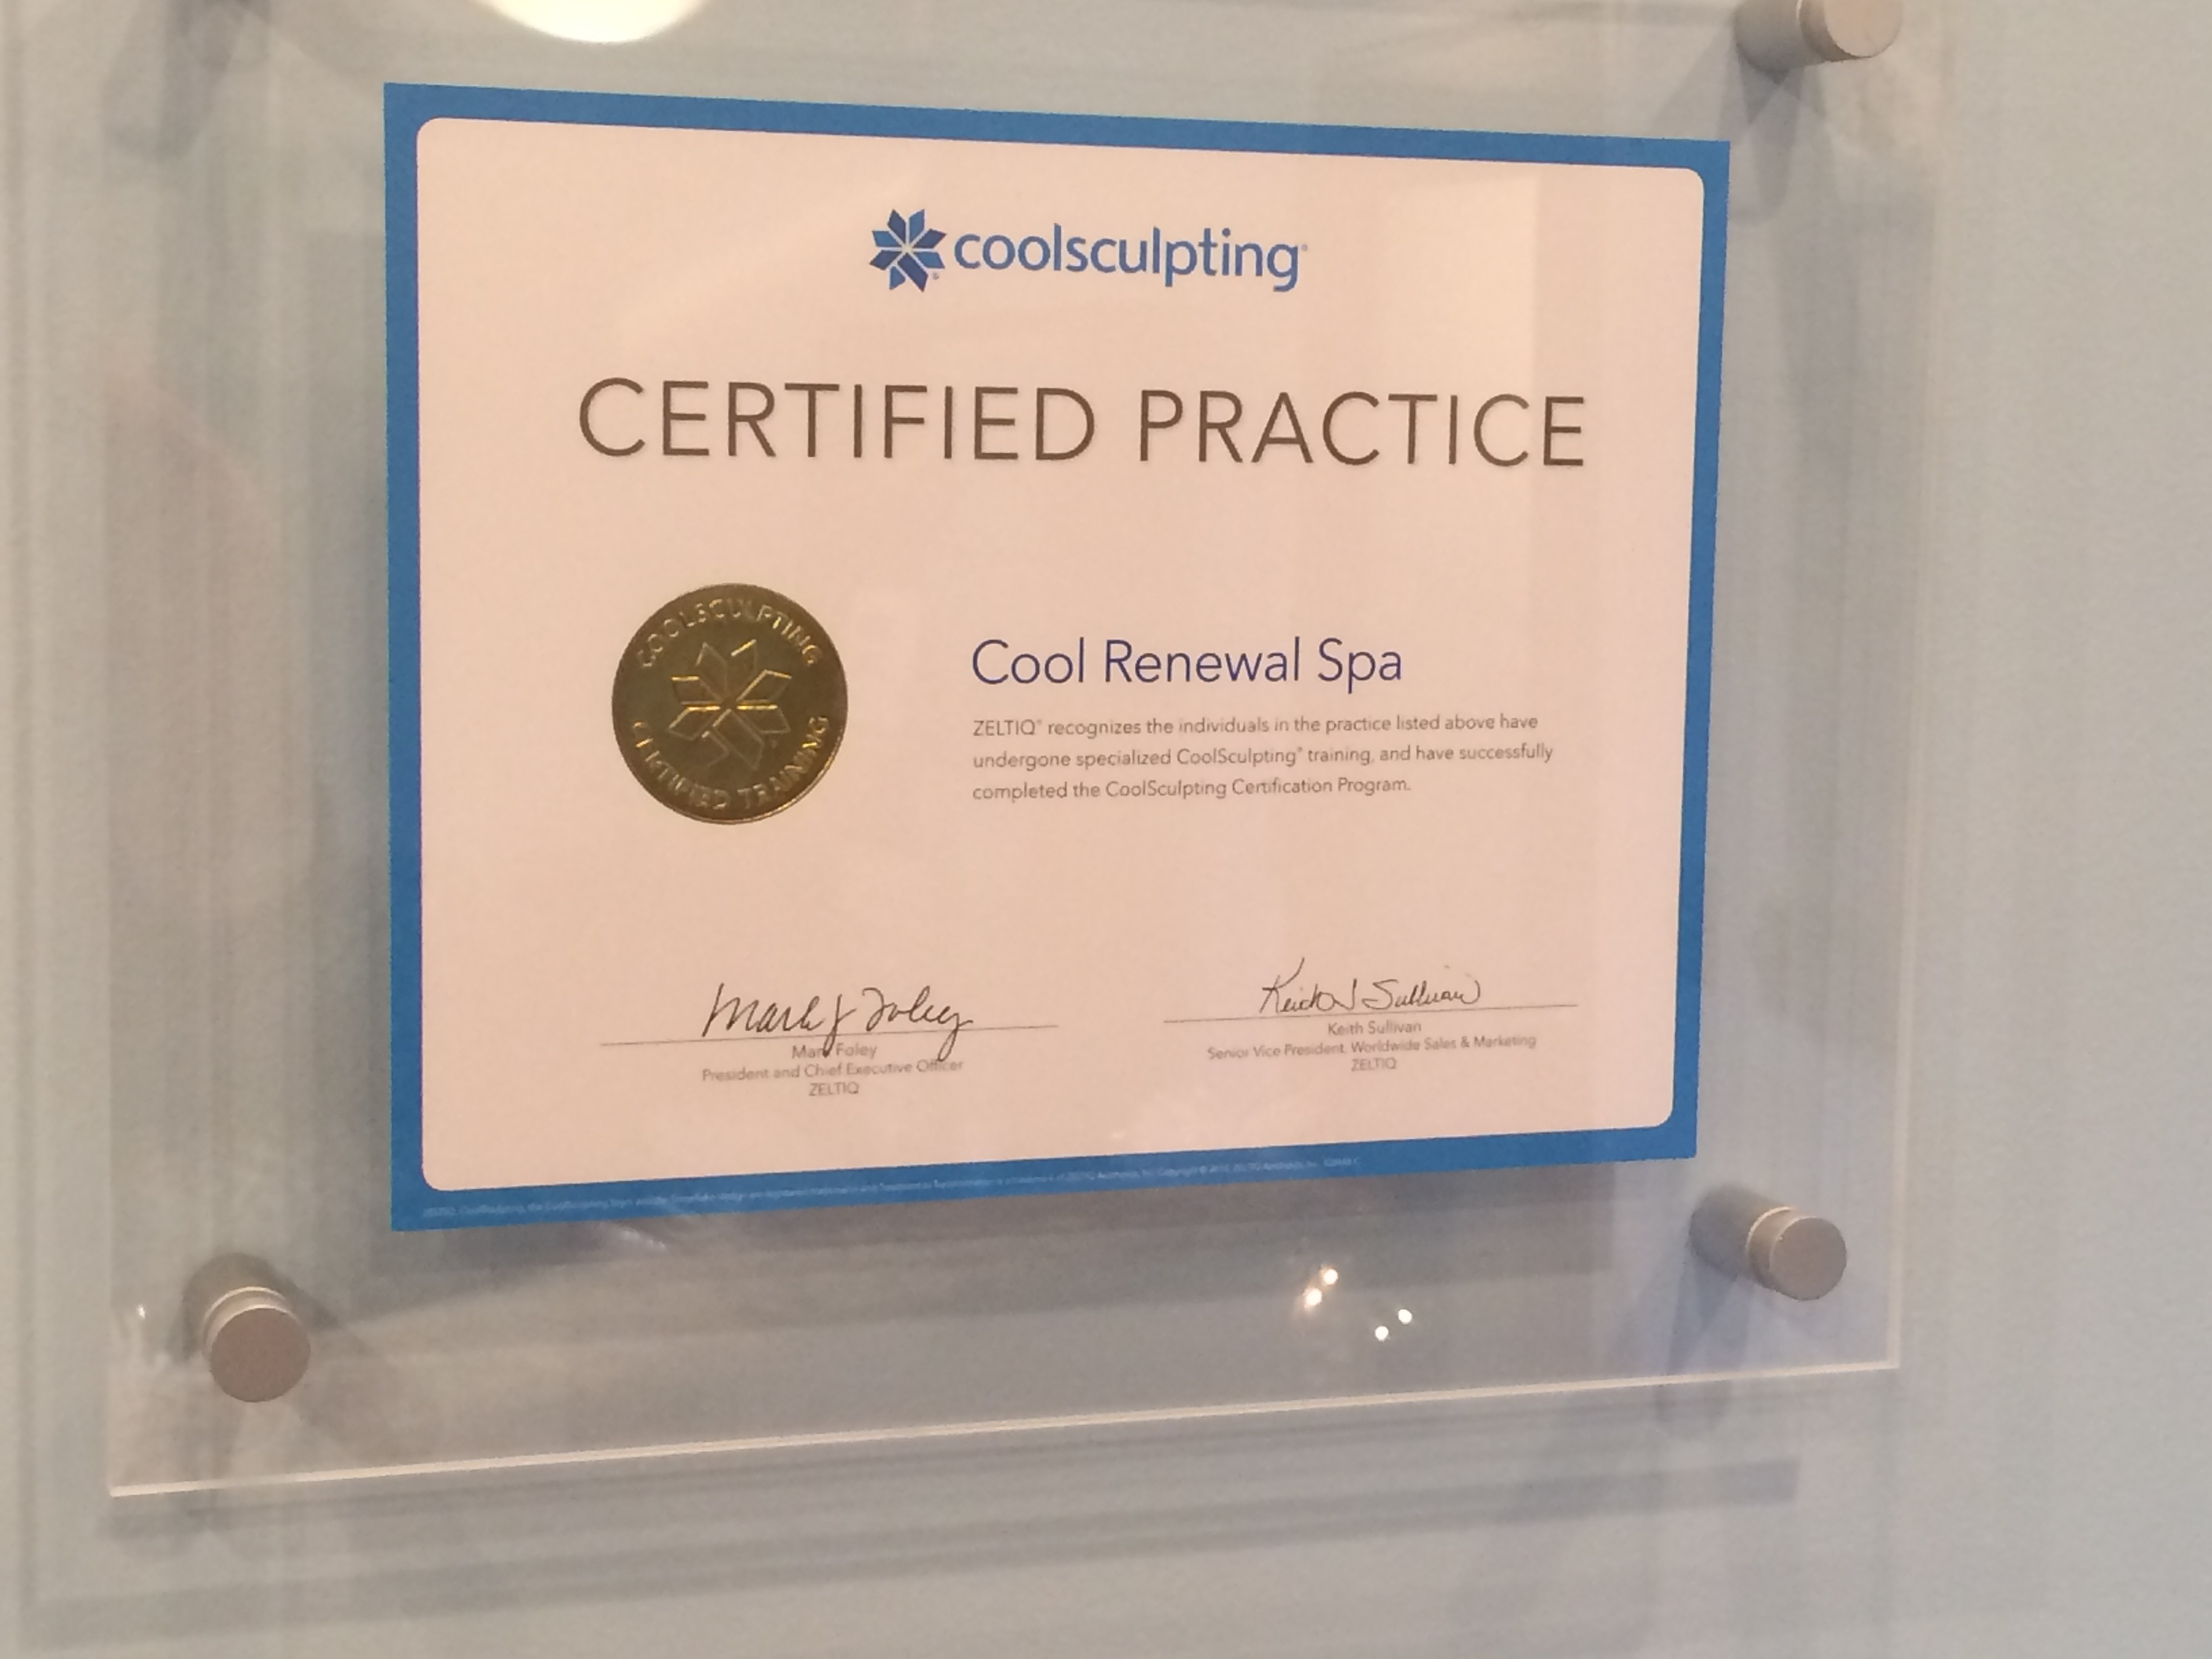 CoolRenewal Spa a Certified CoolSculpting Practice